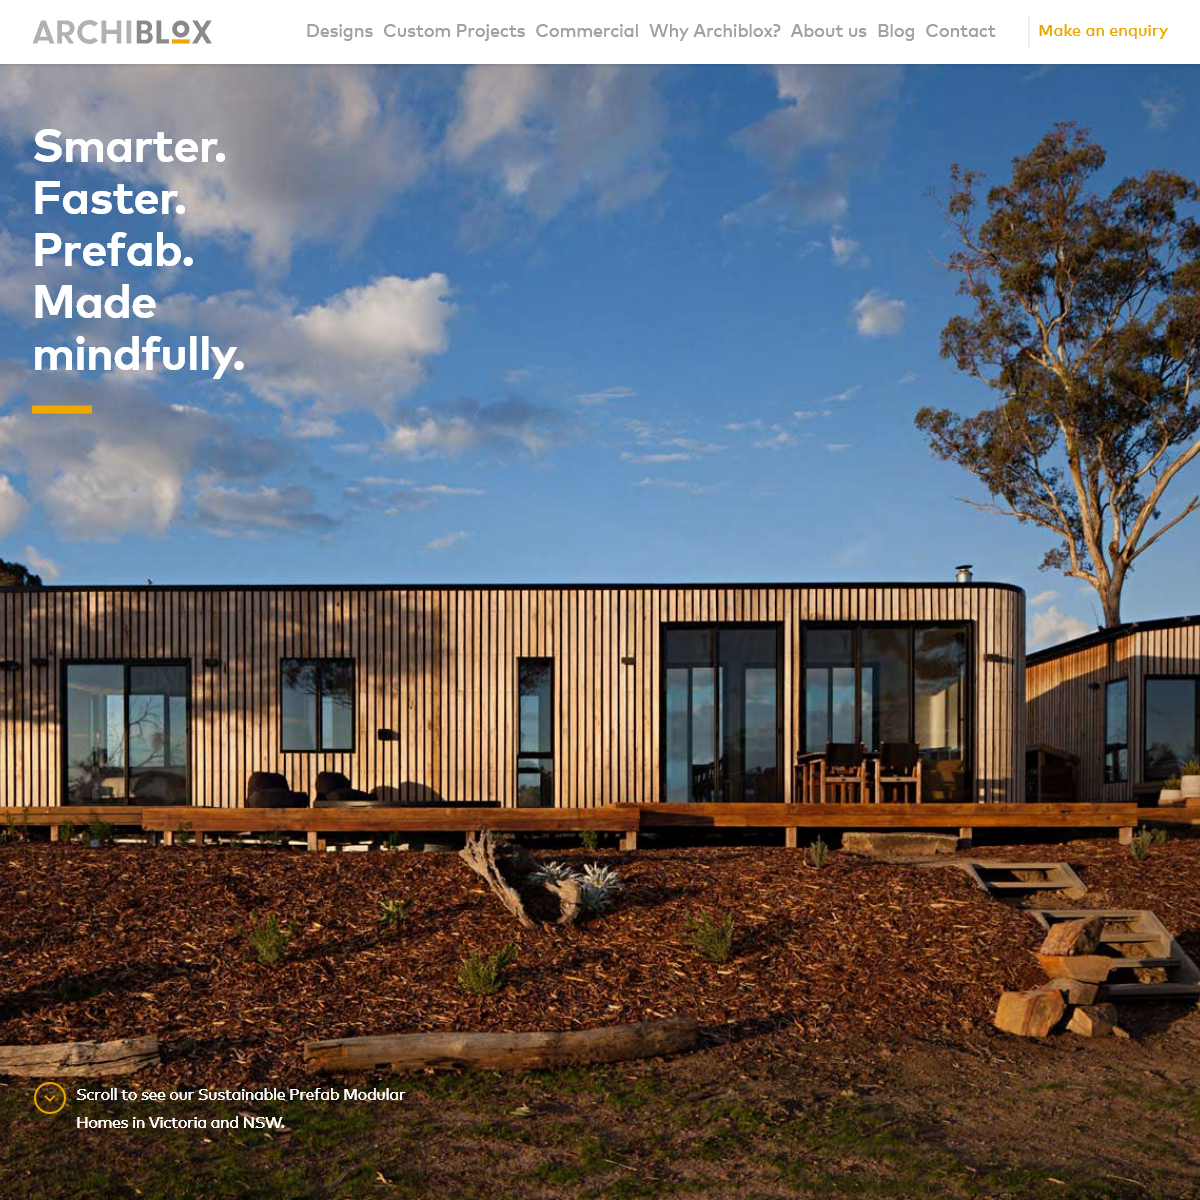 Archiblox Modular Homes - Sustainable Prefab Homes - Victoria NSW - Discover your new home today.